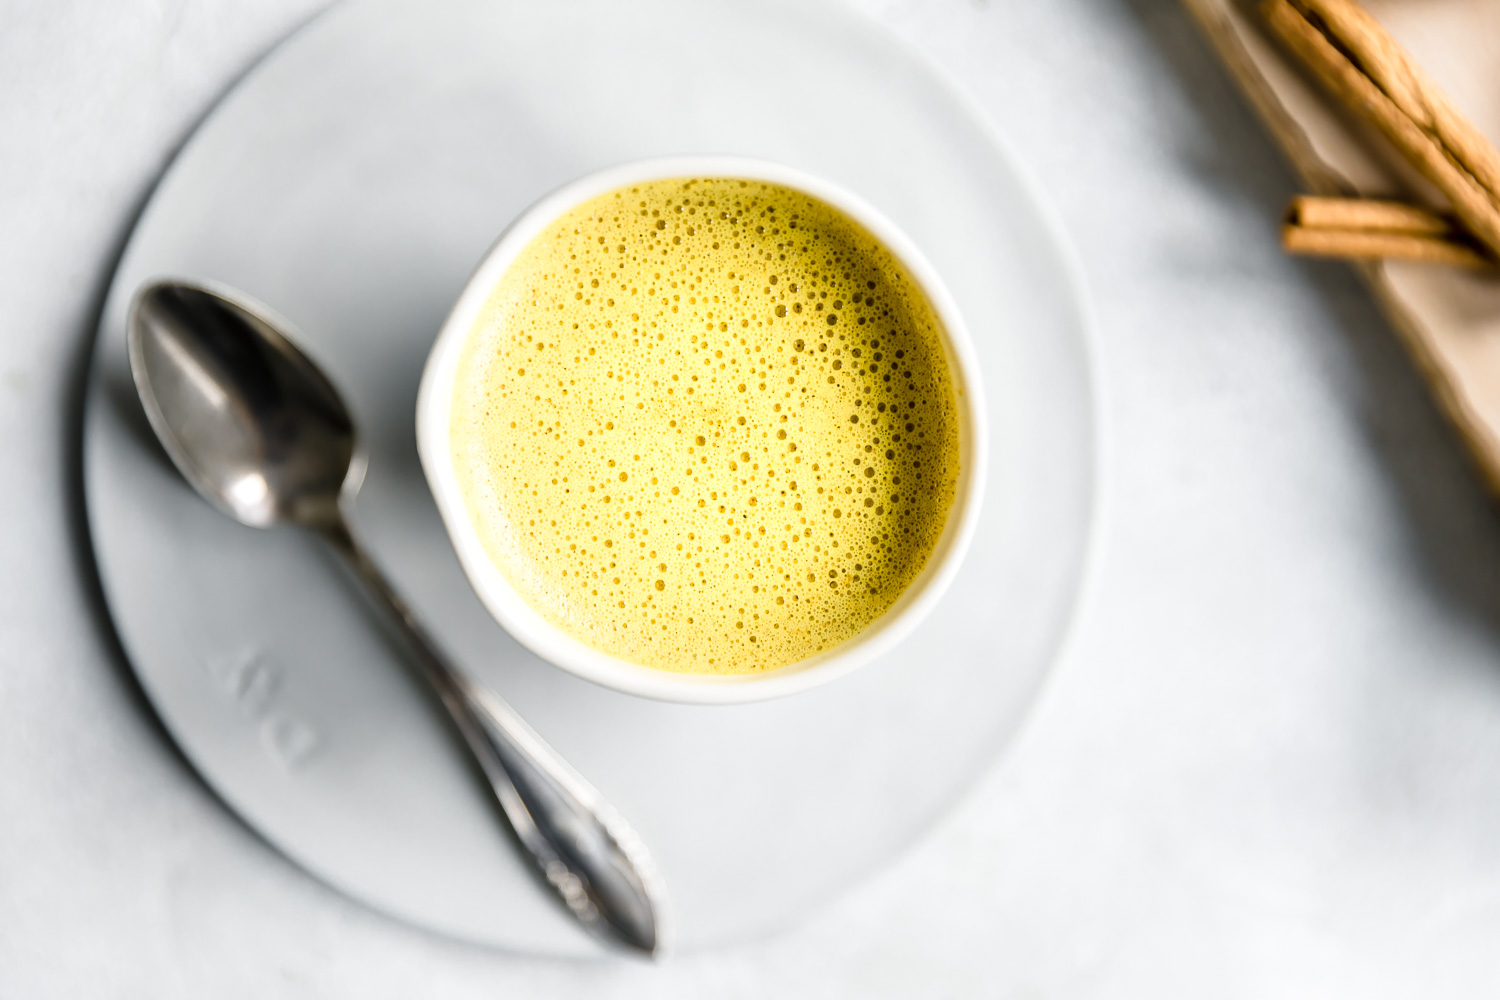 golden milk in white cup on a small white plate next to a silver teaspoon